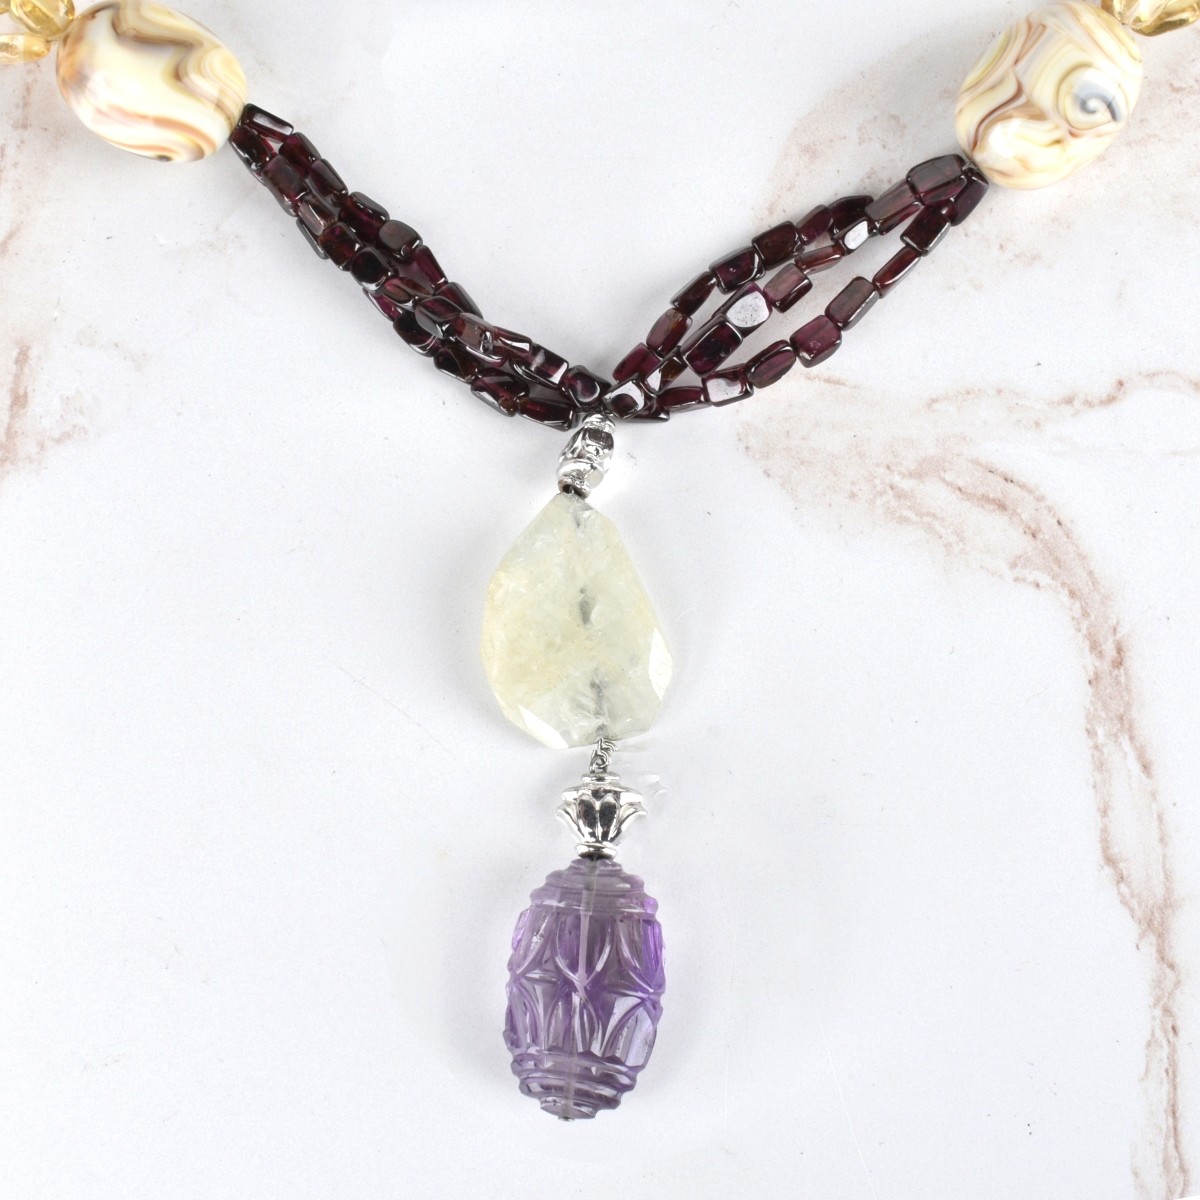 Citrine, Topaz, Amethyst and Agate Necklace